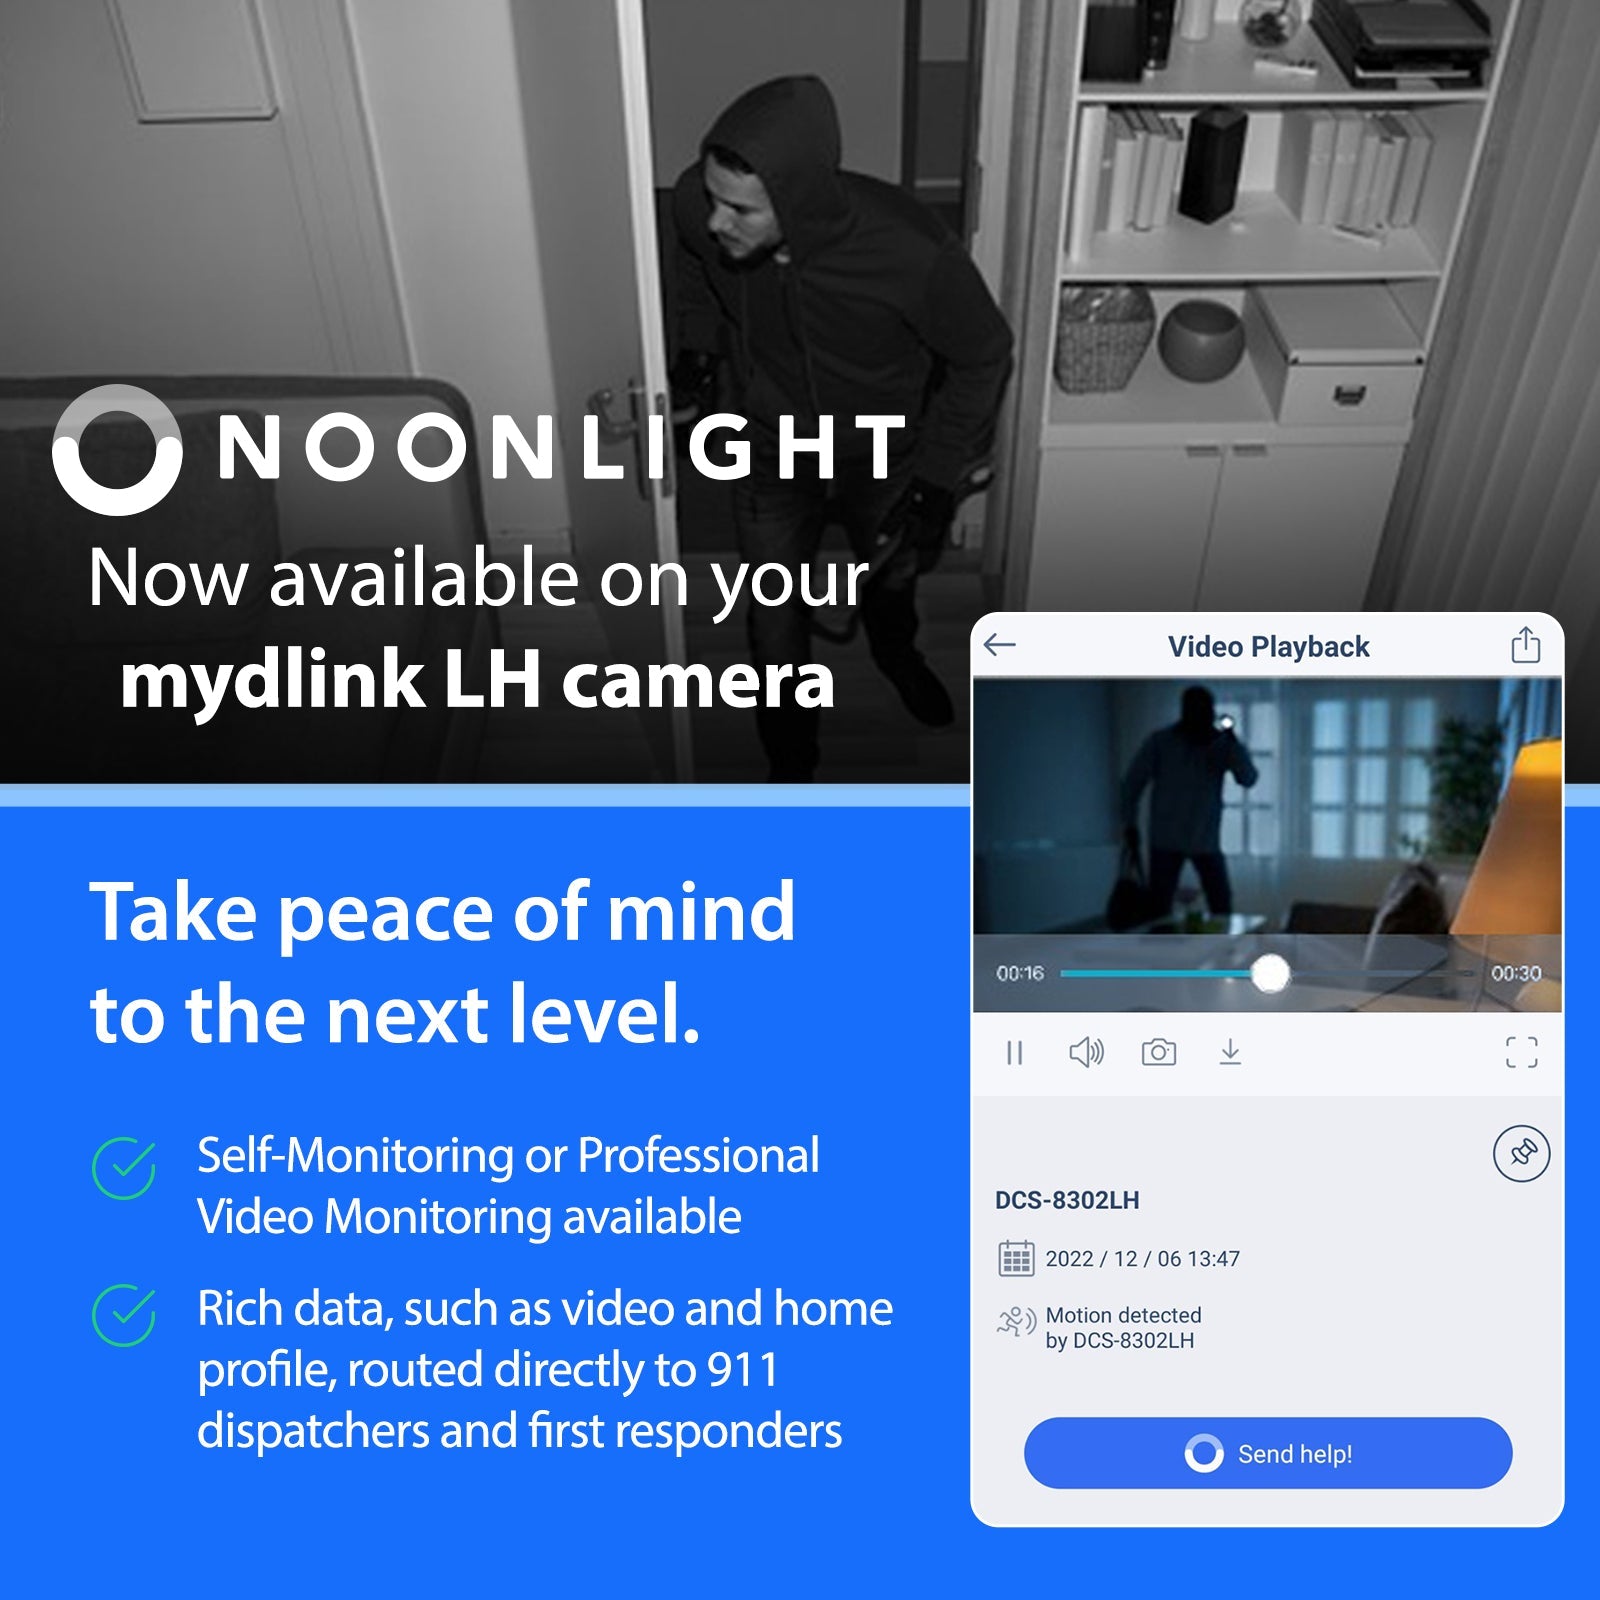 D-Link mydlink Professional Video Monitoring with Noonlight